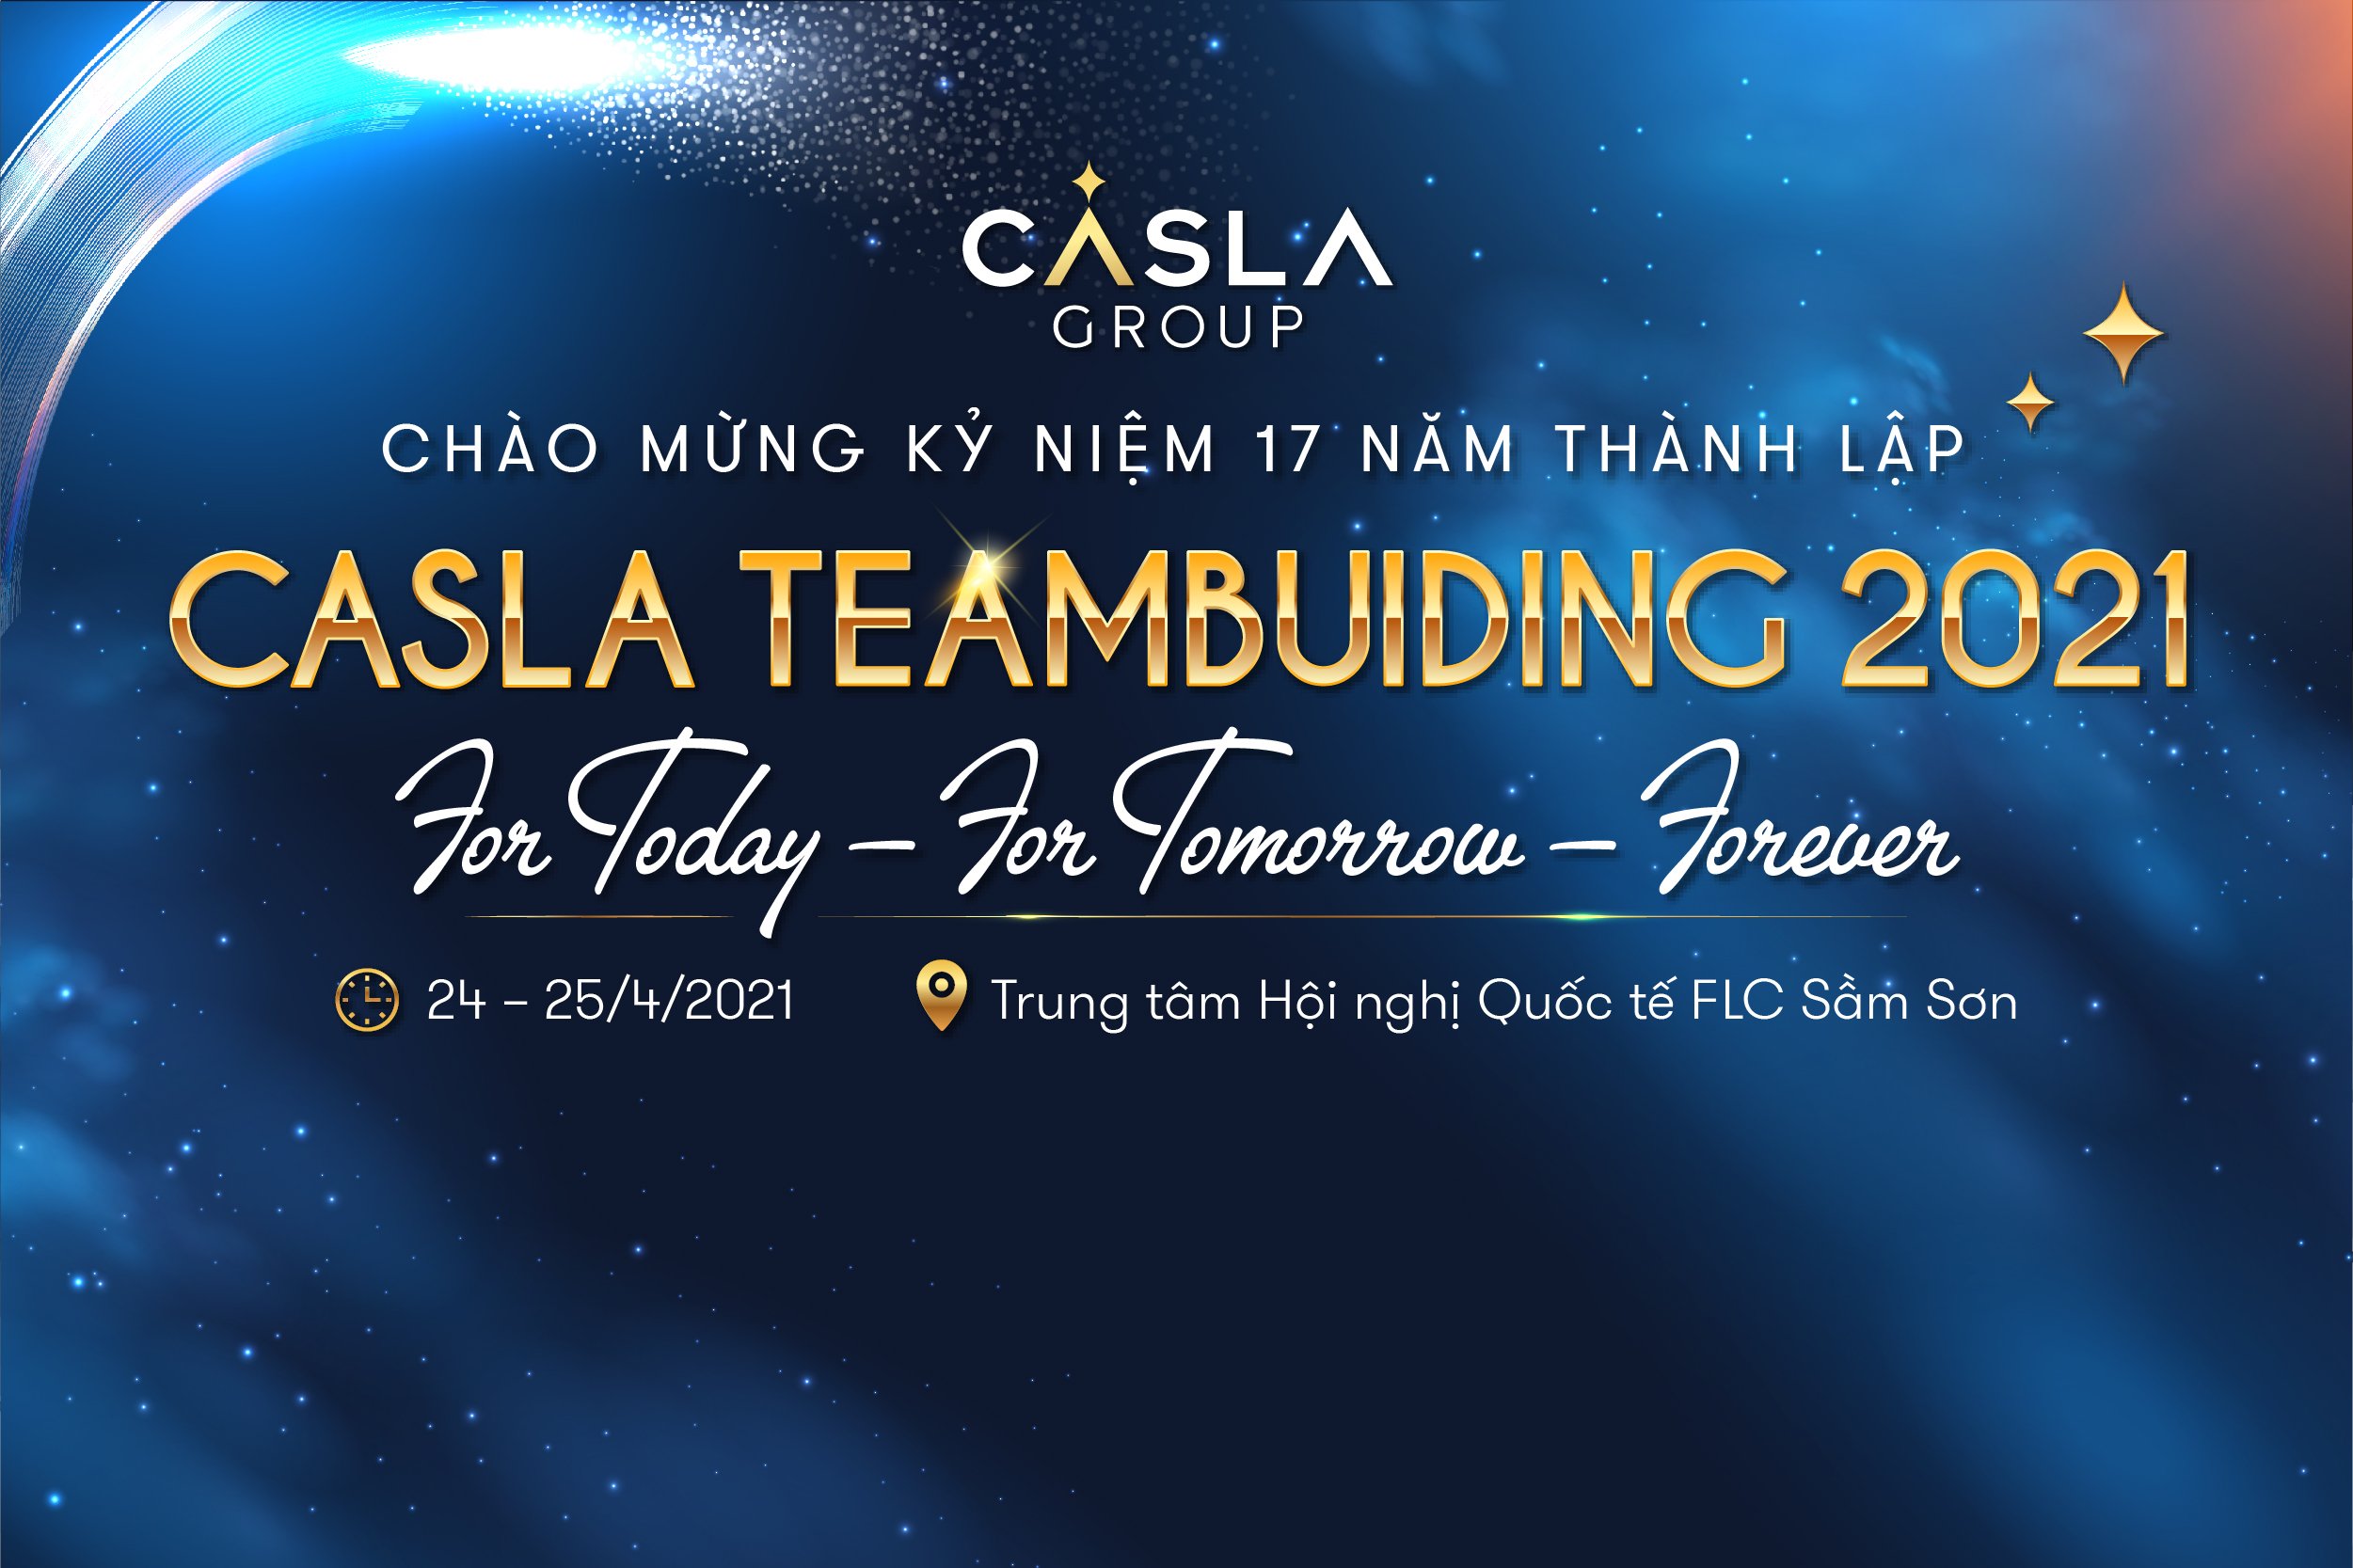 Tổ chức team building: Casla Group - For today - For Tomorrow - Forever